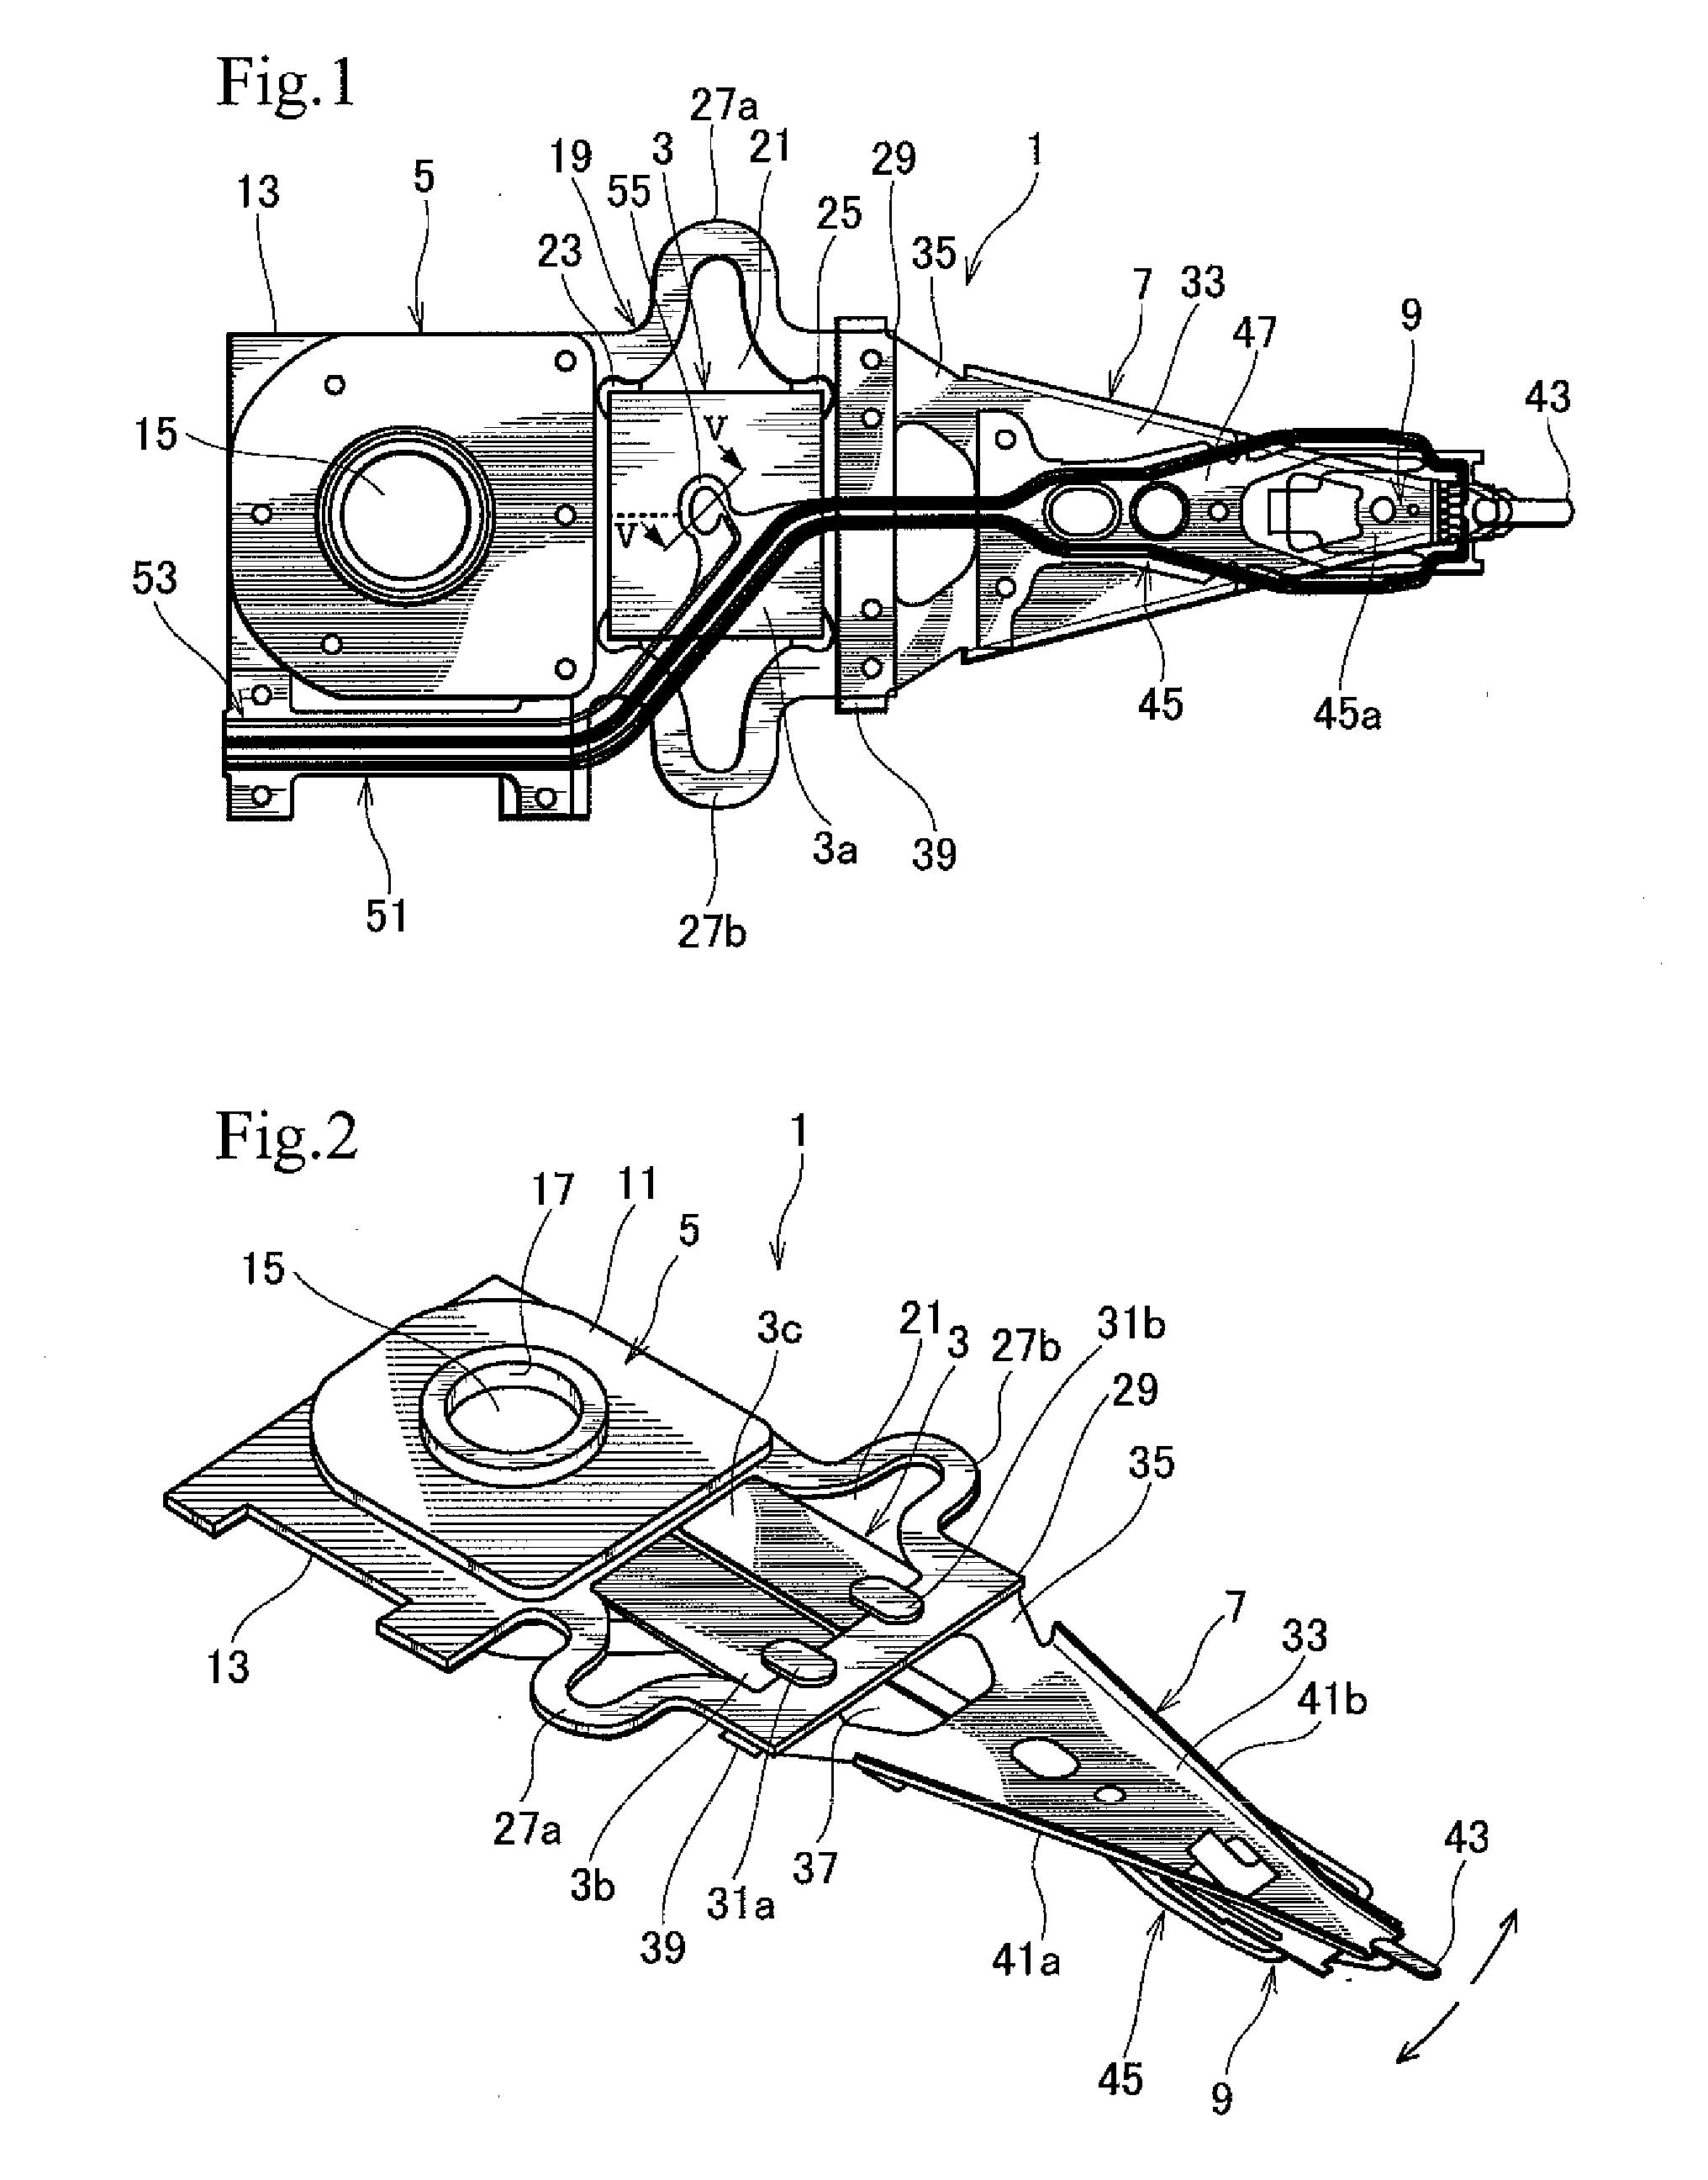 Electrical connection structure for piezoelectric element and head suspension